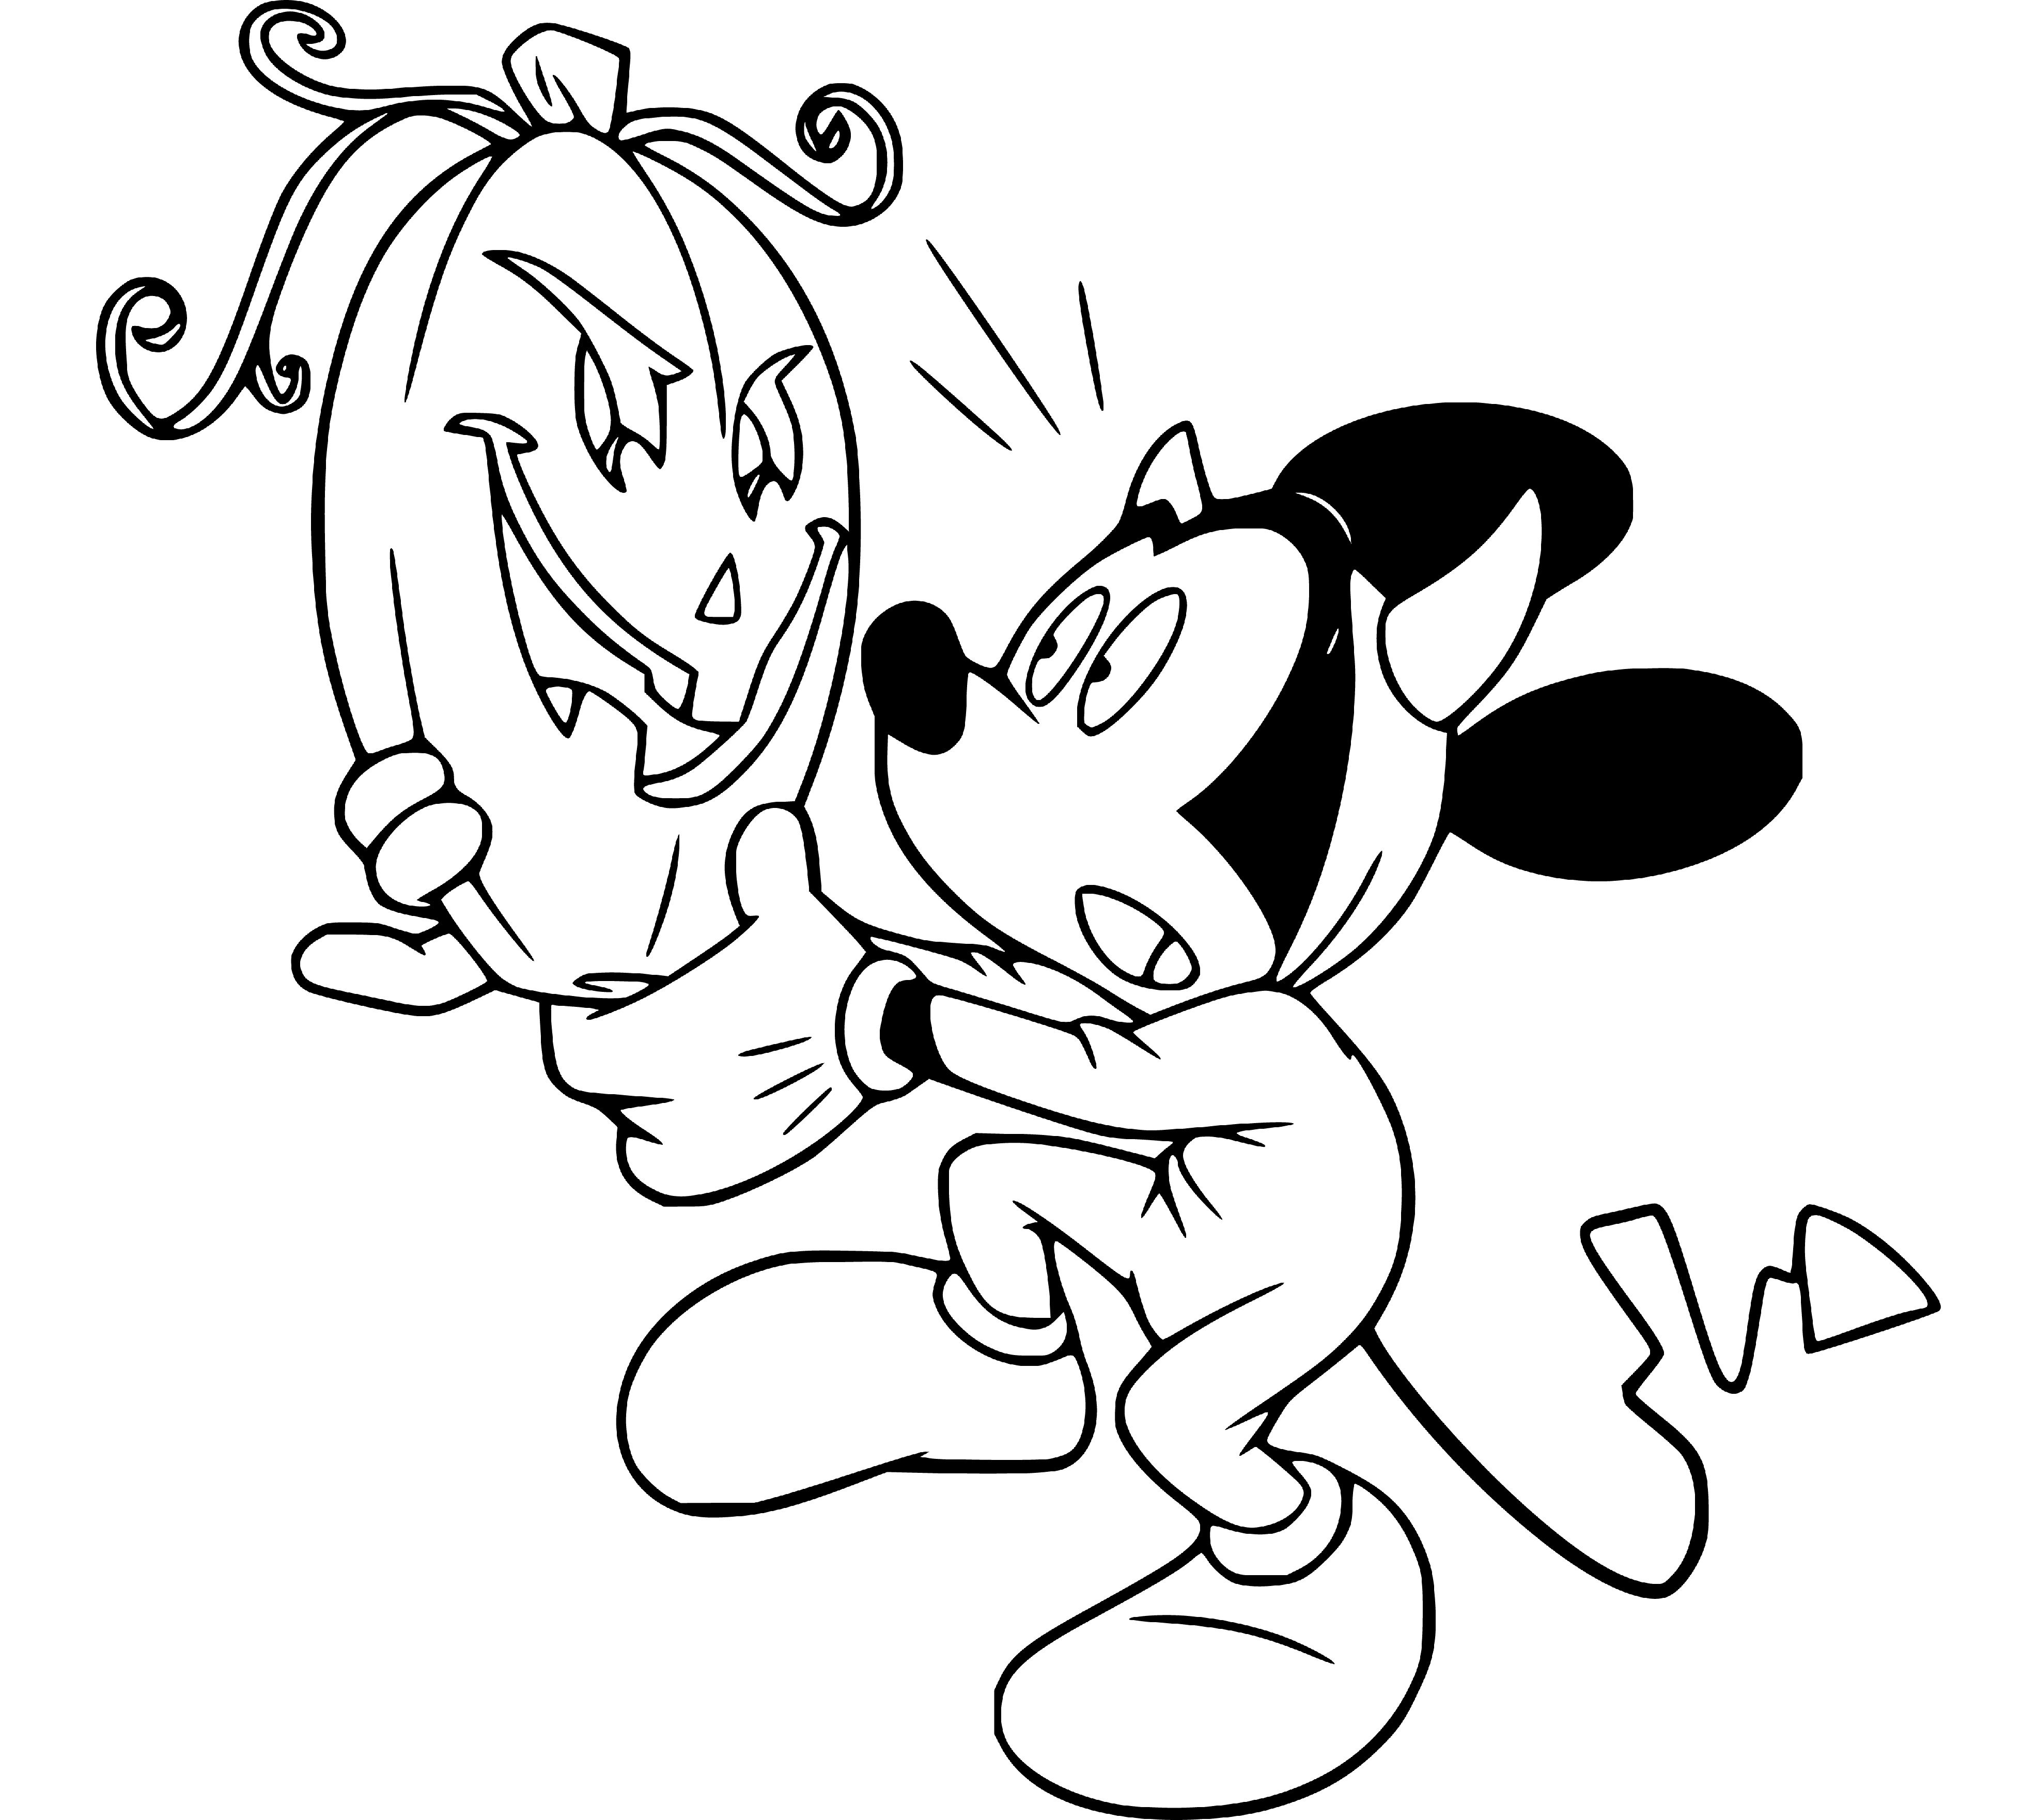 Mickey Mouse Coloring Page for Kids - SheetalColor.com